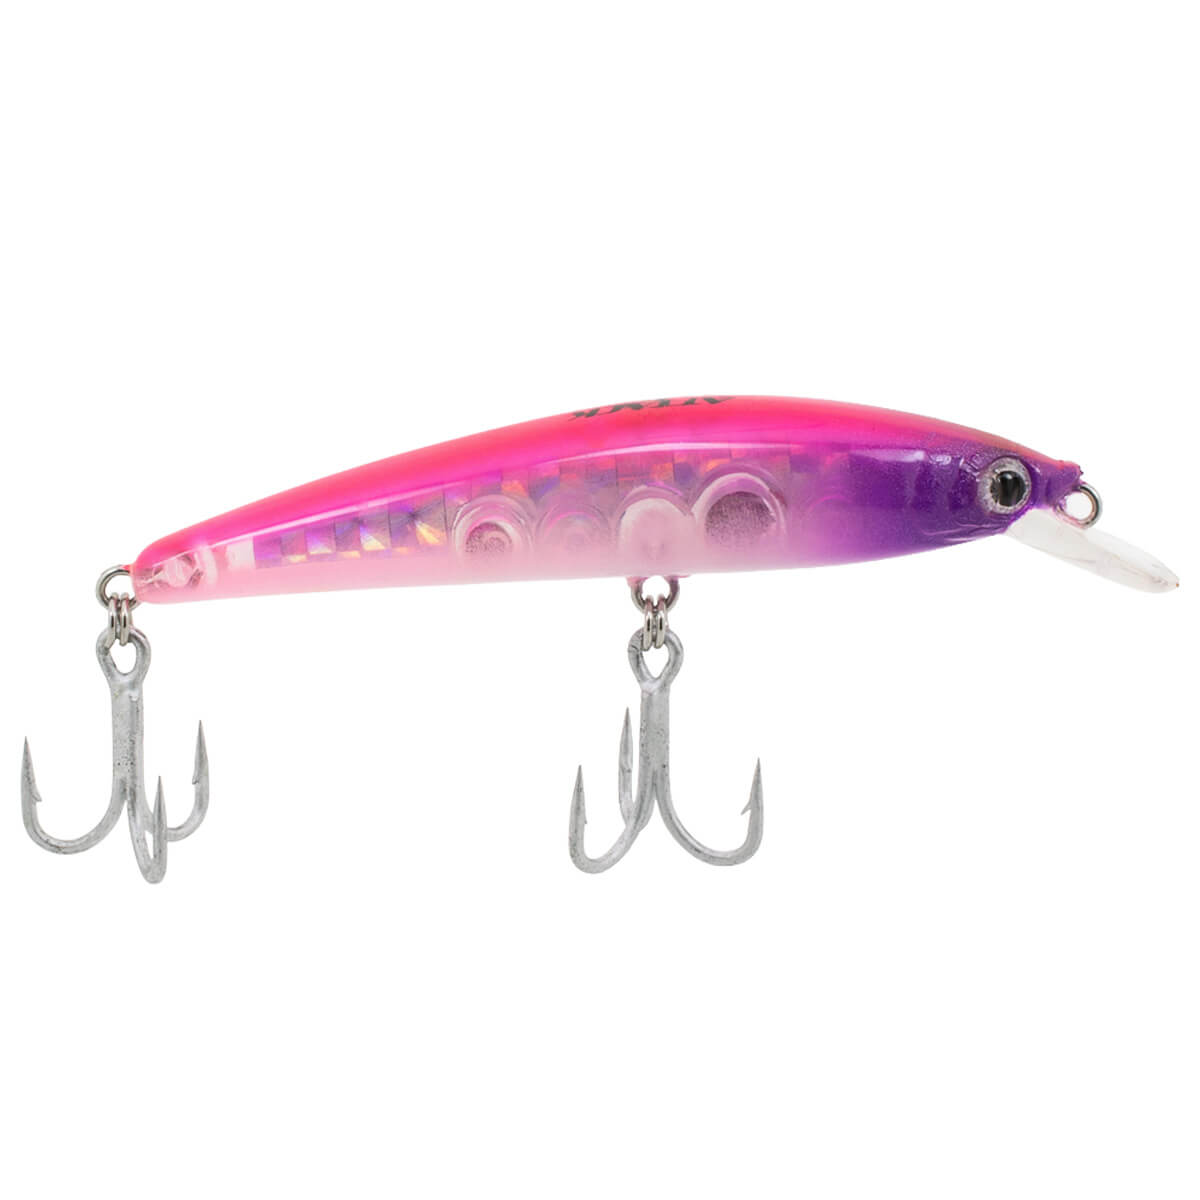 ISCA ATTACK XT85 FLOATING - 8,5CM 8,7G